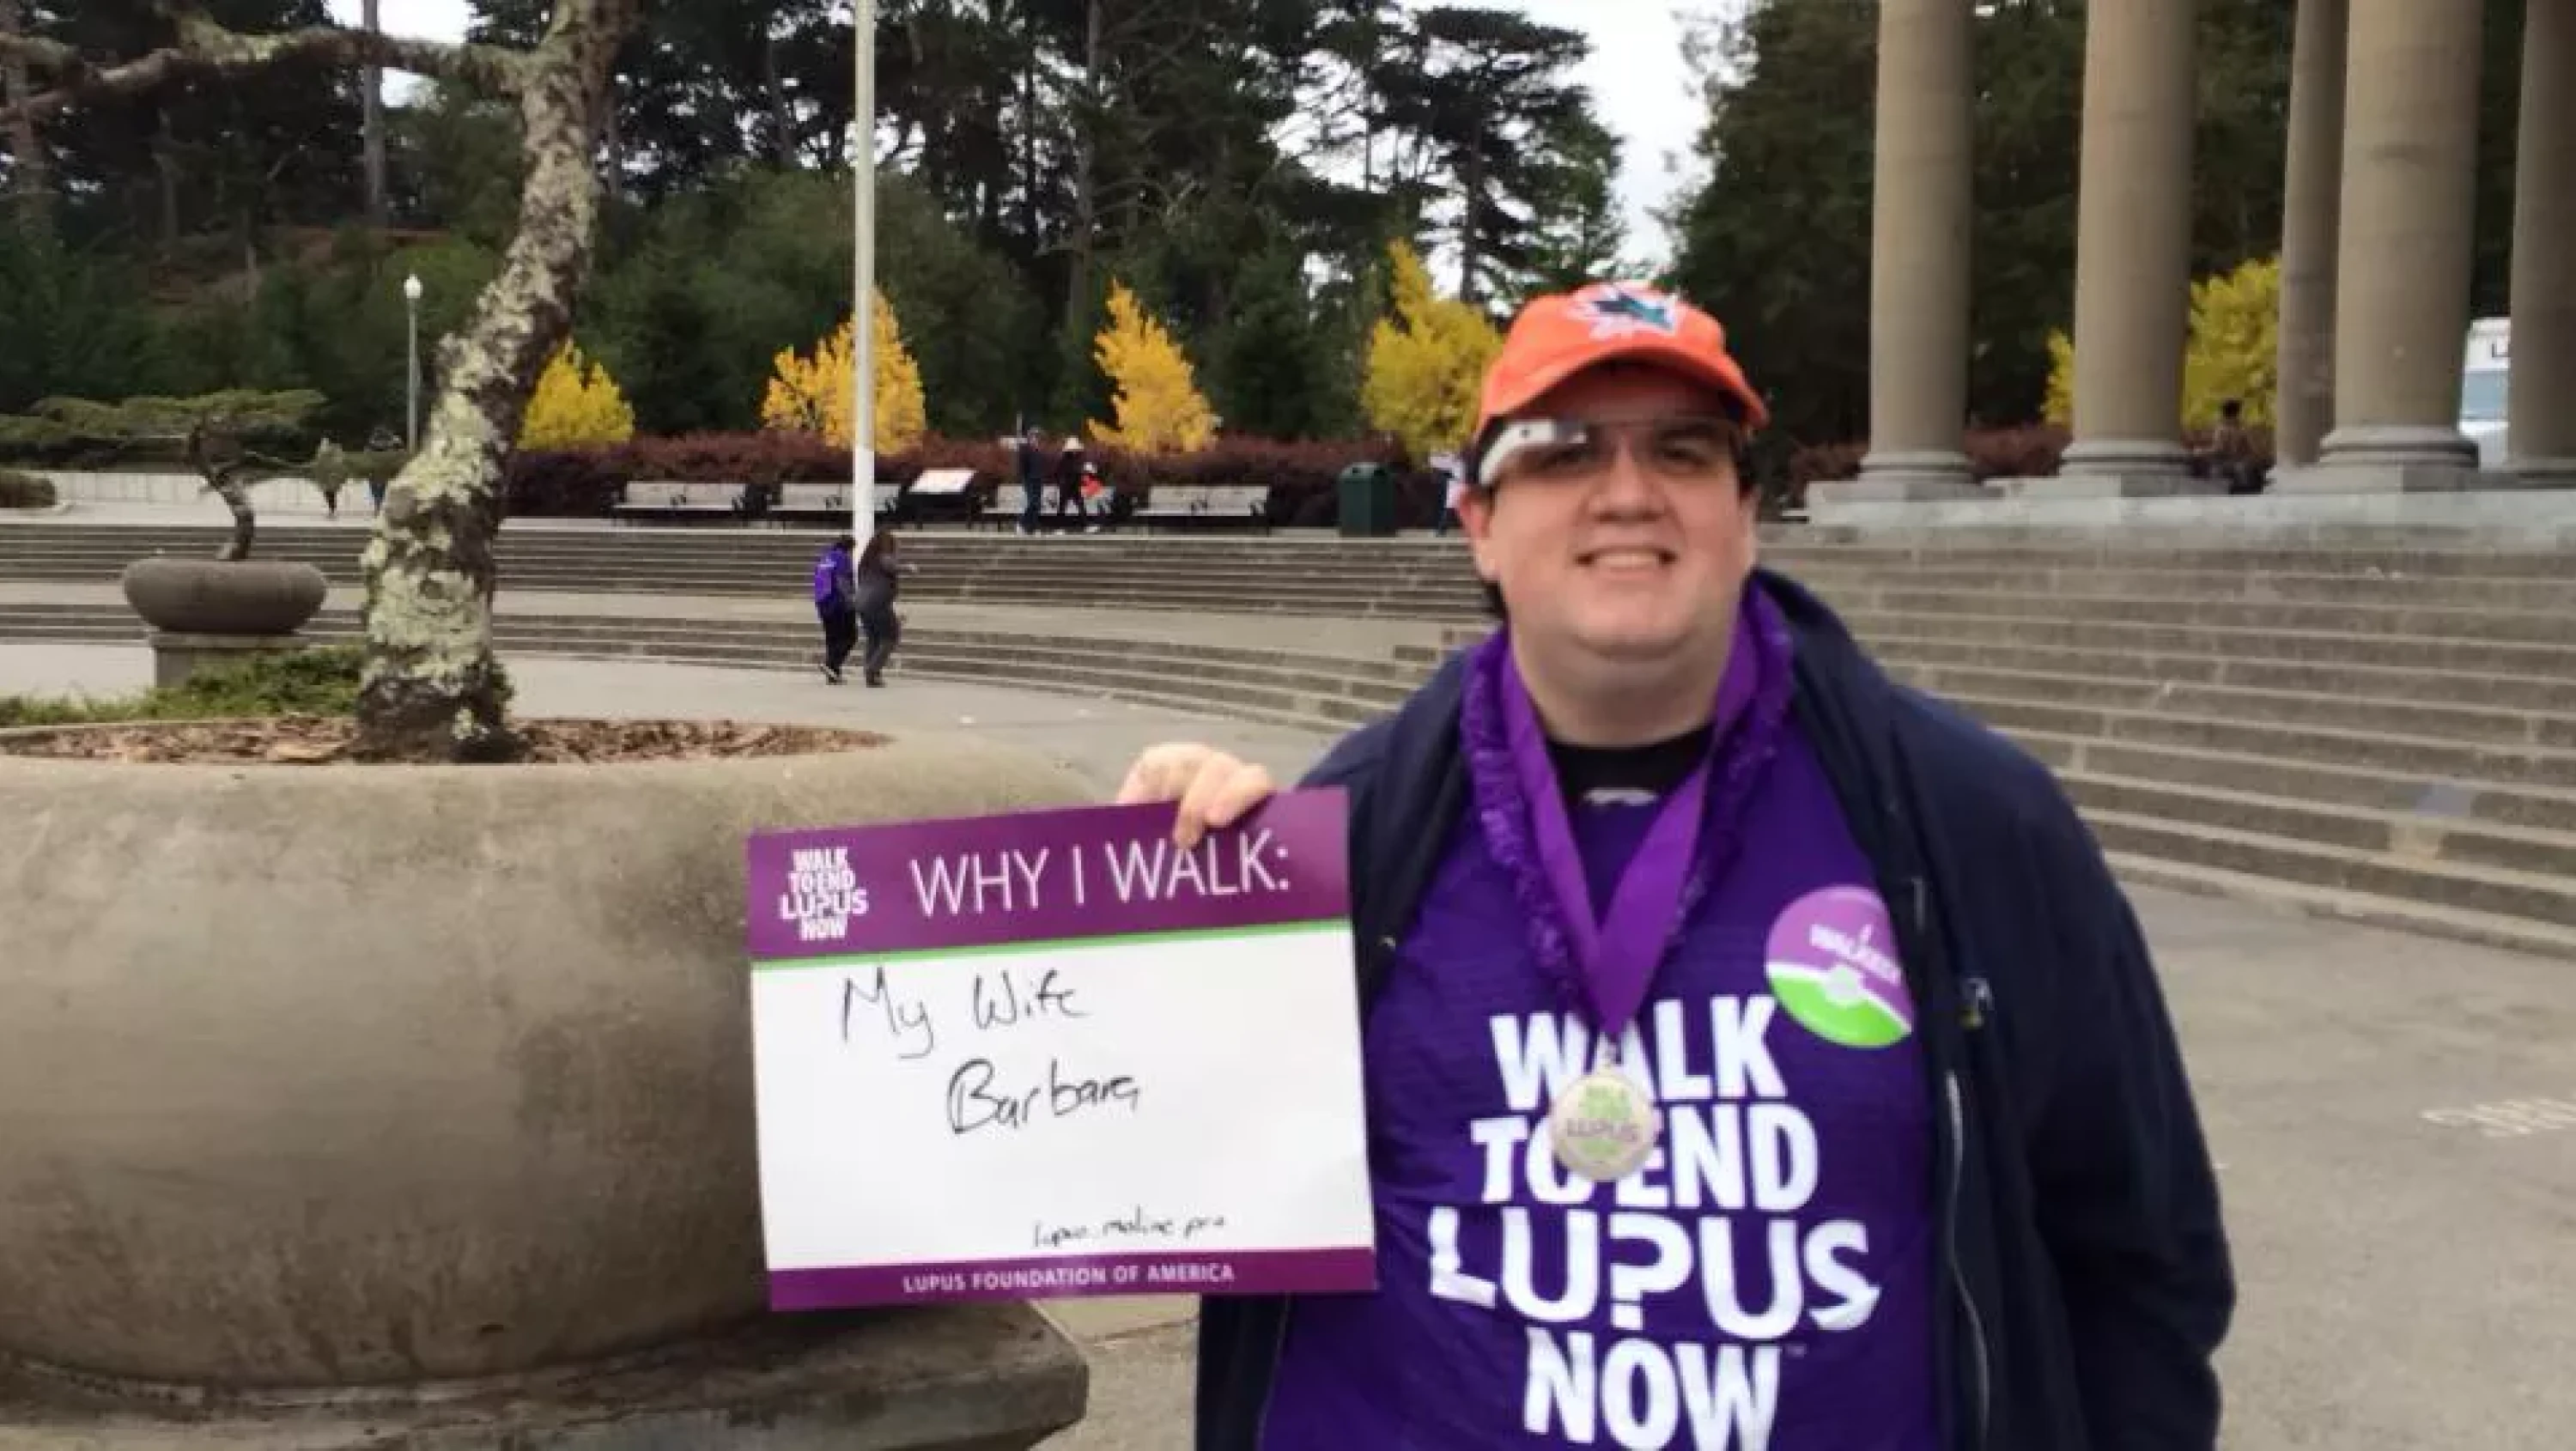 Nick at the Walk to end Lupus Now